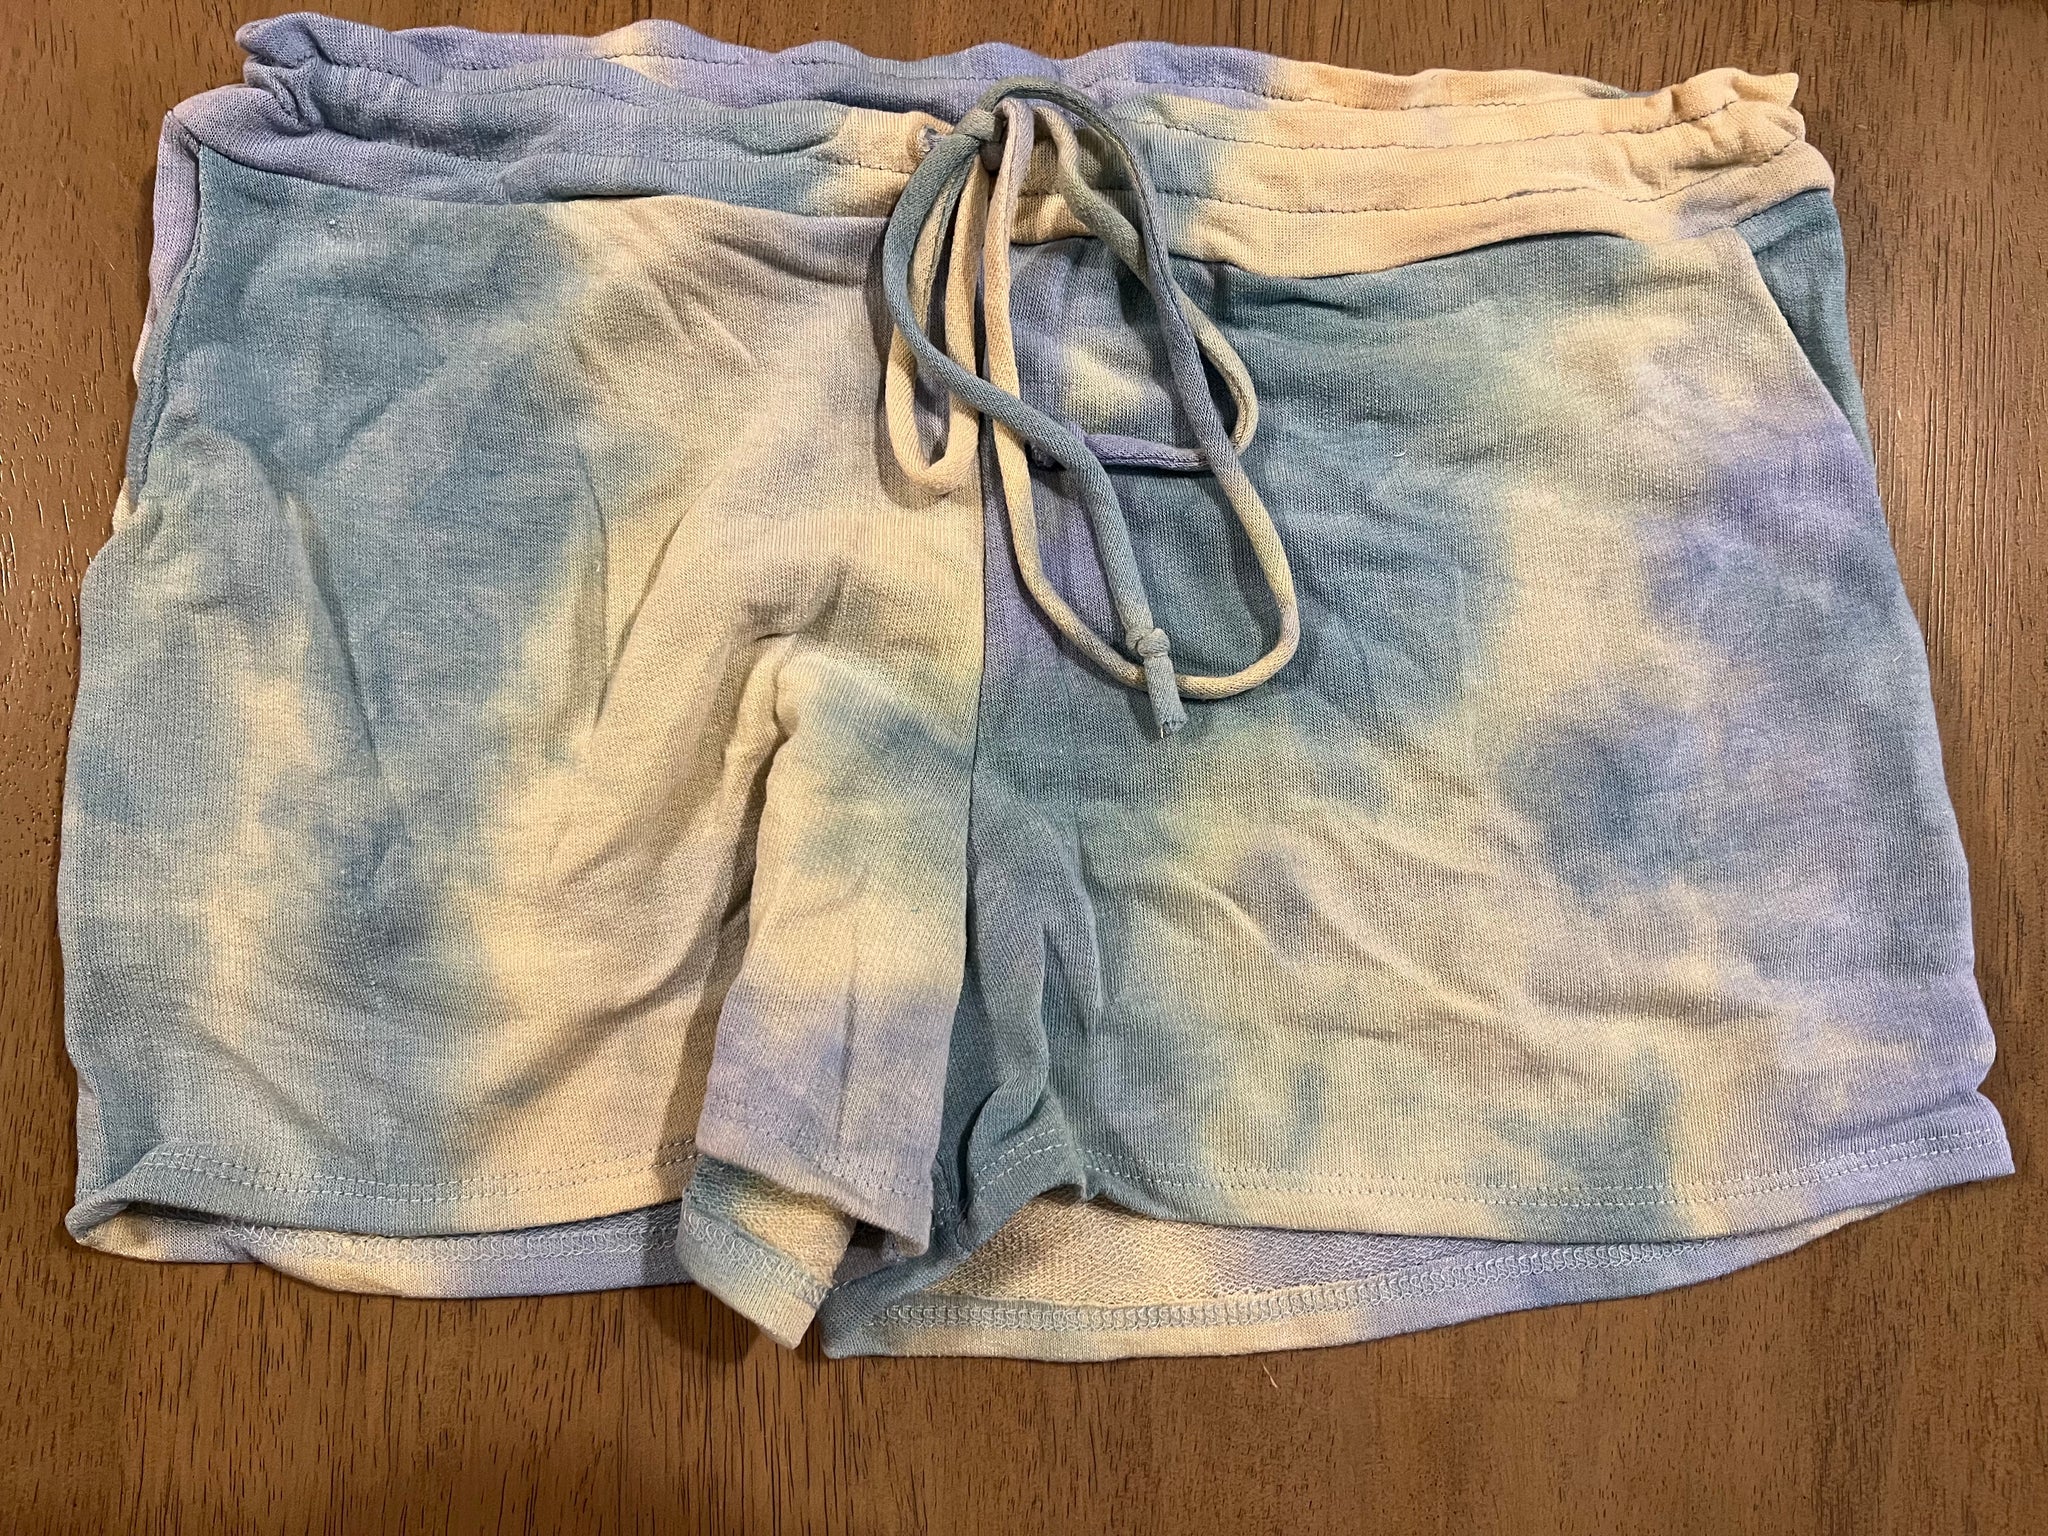 TIE DYE PRINT CASUAL SHORT PANTS WITH WAIST BAND AND POCKET DETAIL